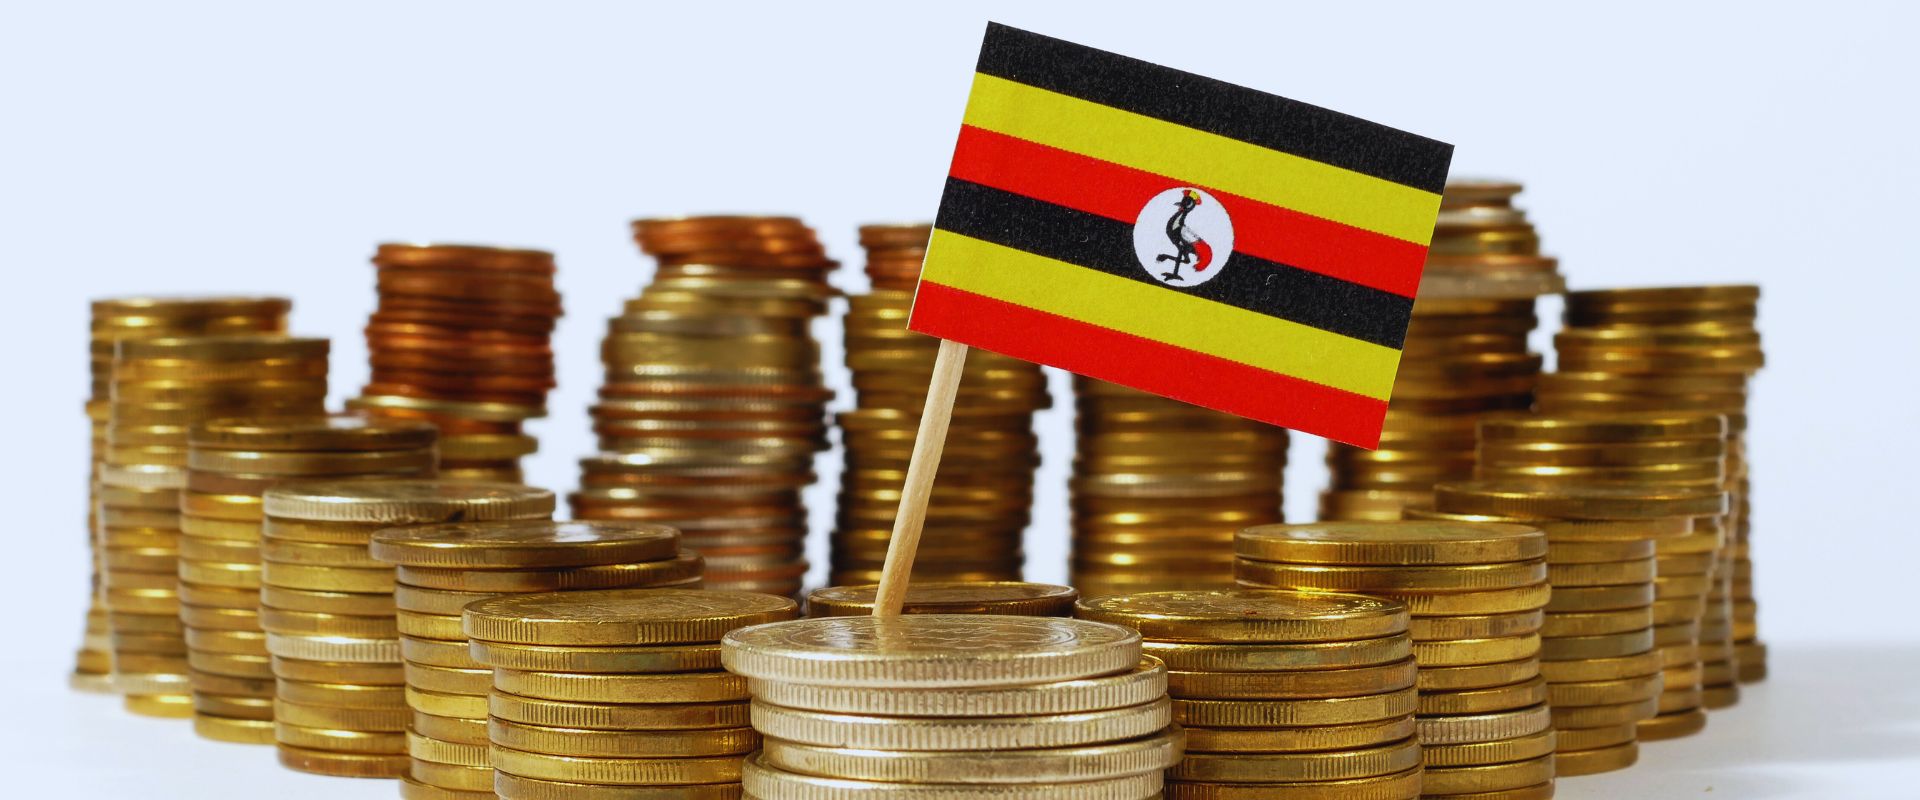 stack of gold coins with Uganda flag